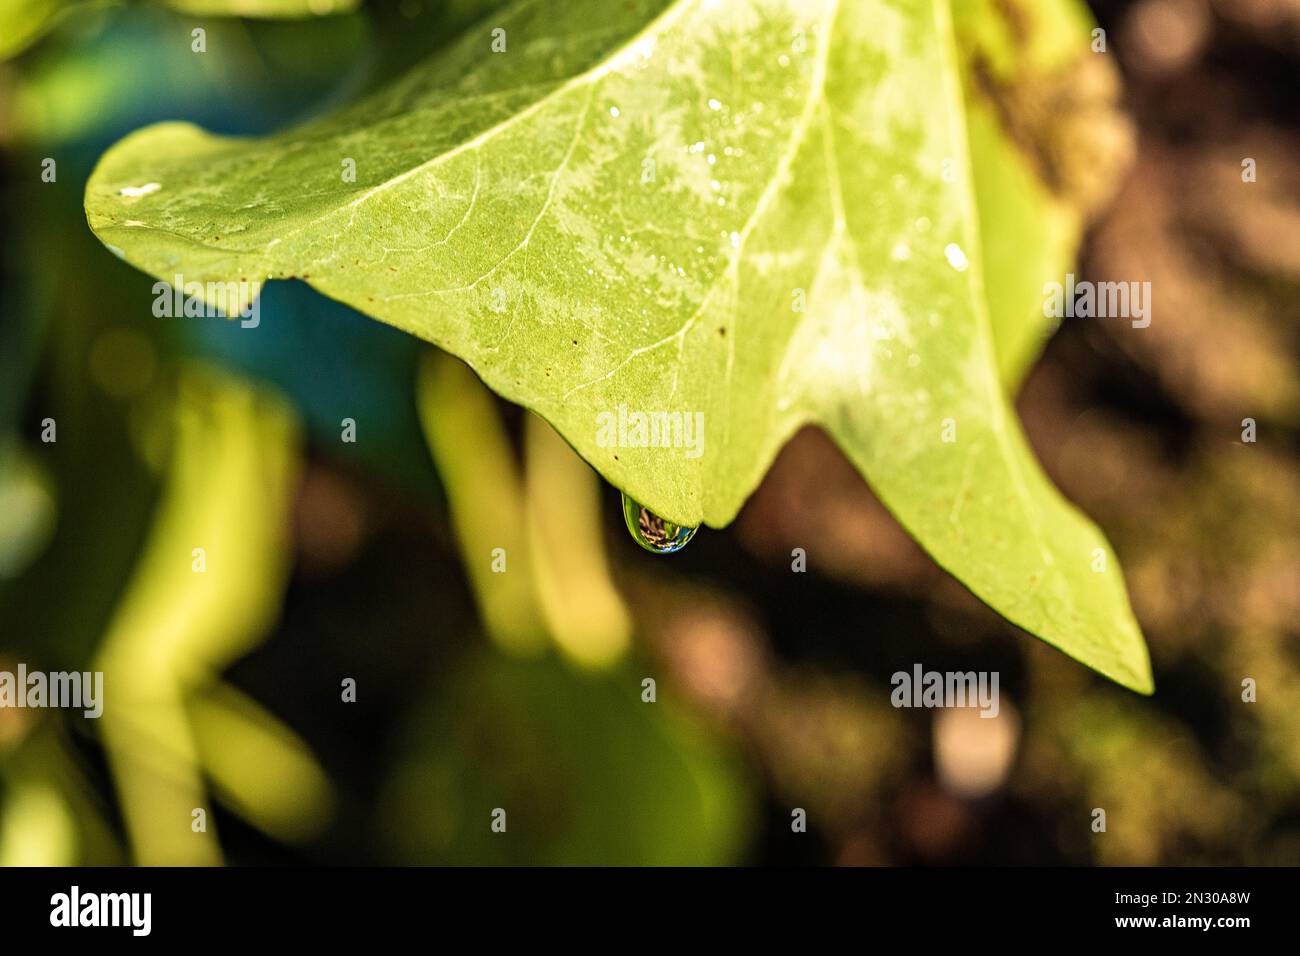 Aesthetic water droplet dripping from fresh green english ivy leave close up Stock Photo